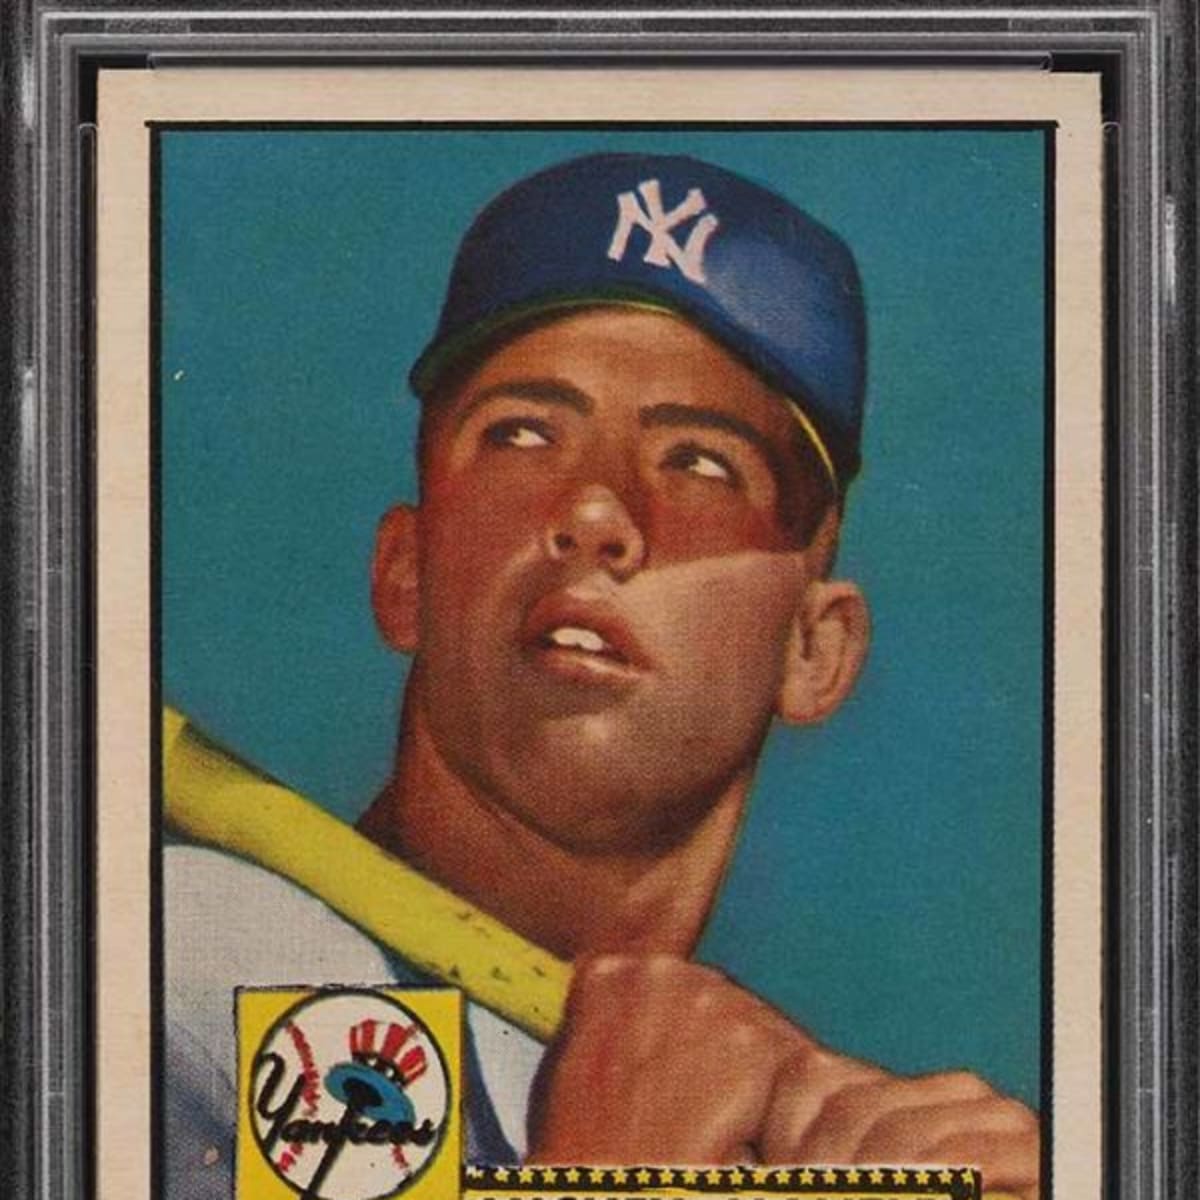 Mickey Mantle Baseball Card Sold for $12.6 Million, Breaking